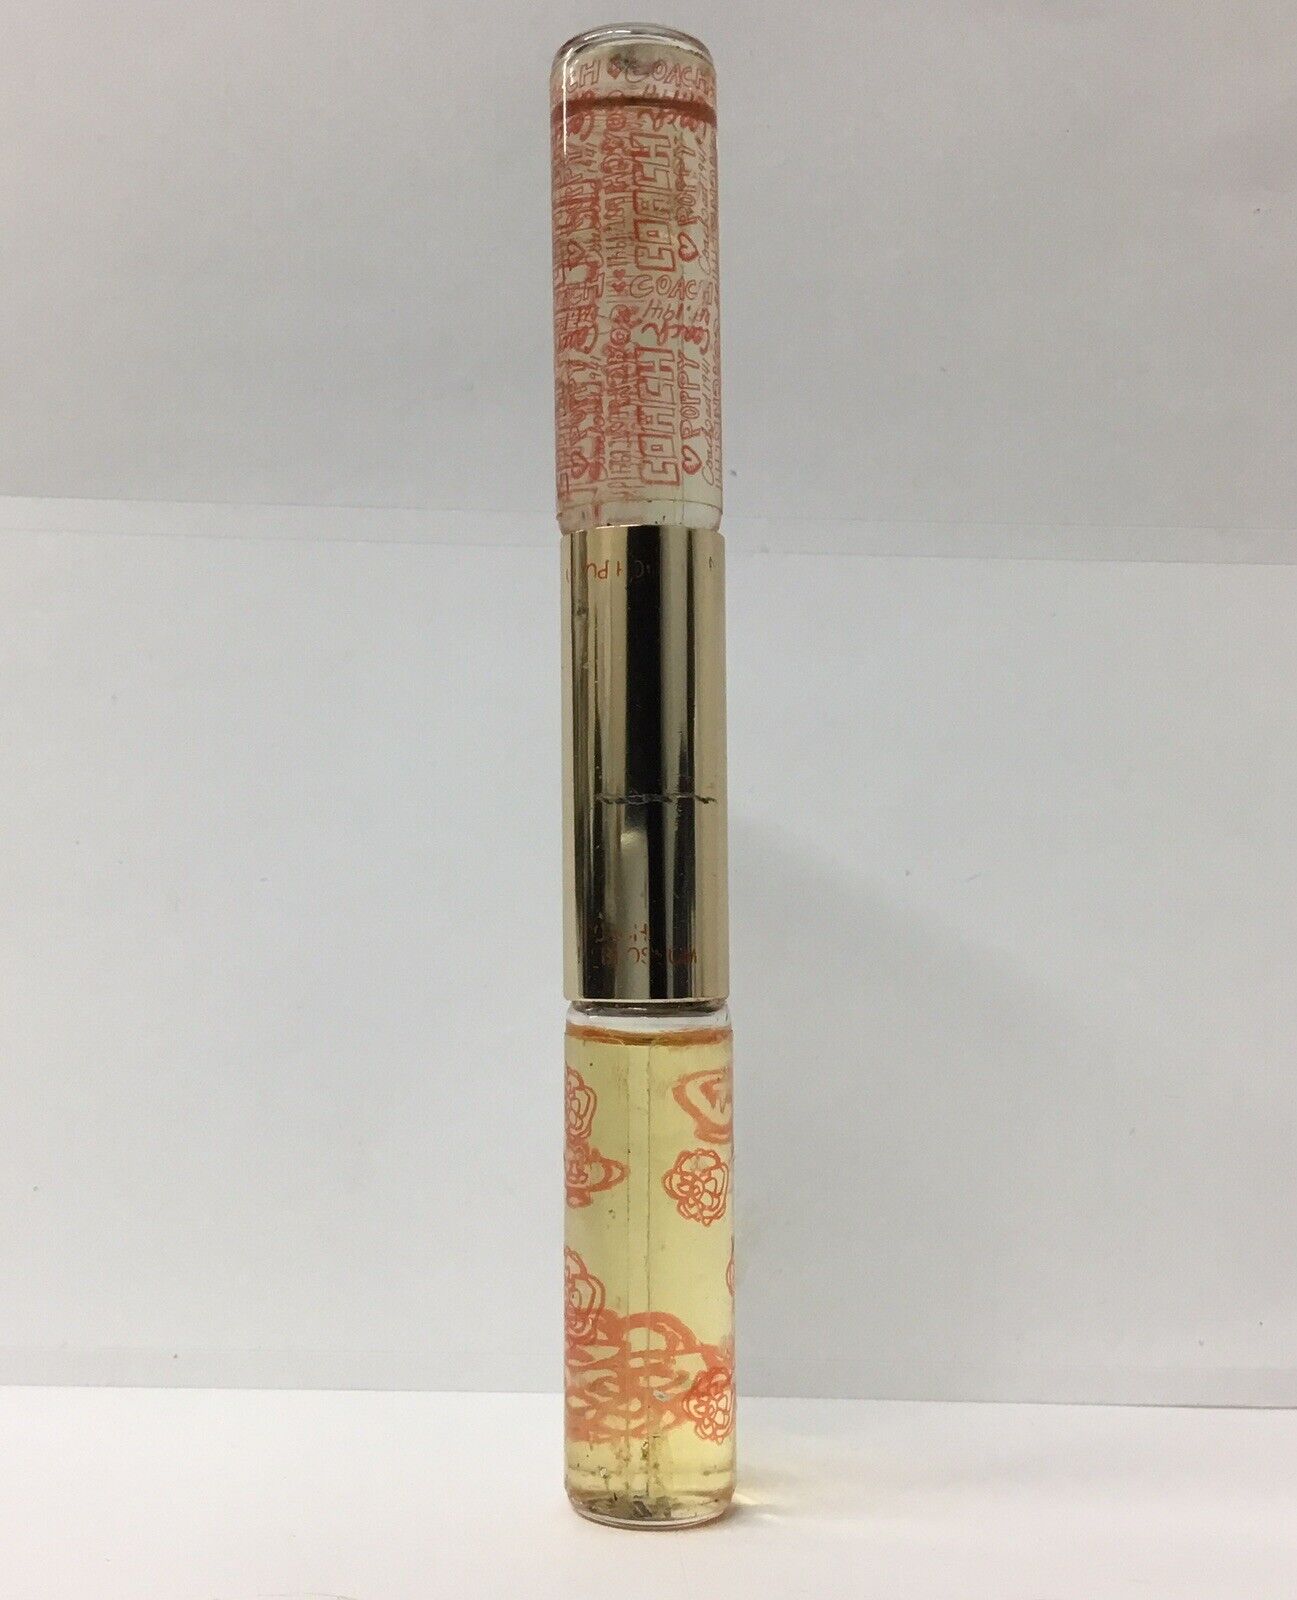 Coach Poppy & Coach Poppy Blossom EDP Rollerball Duo 0.17oz - As Pictured